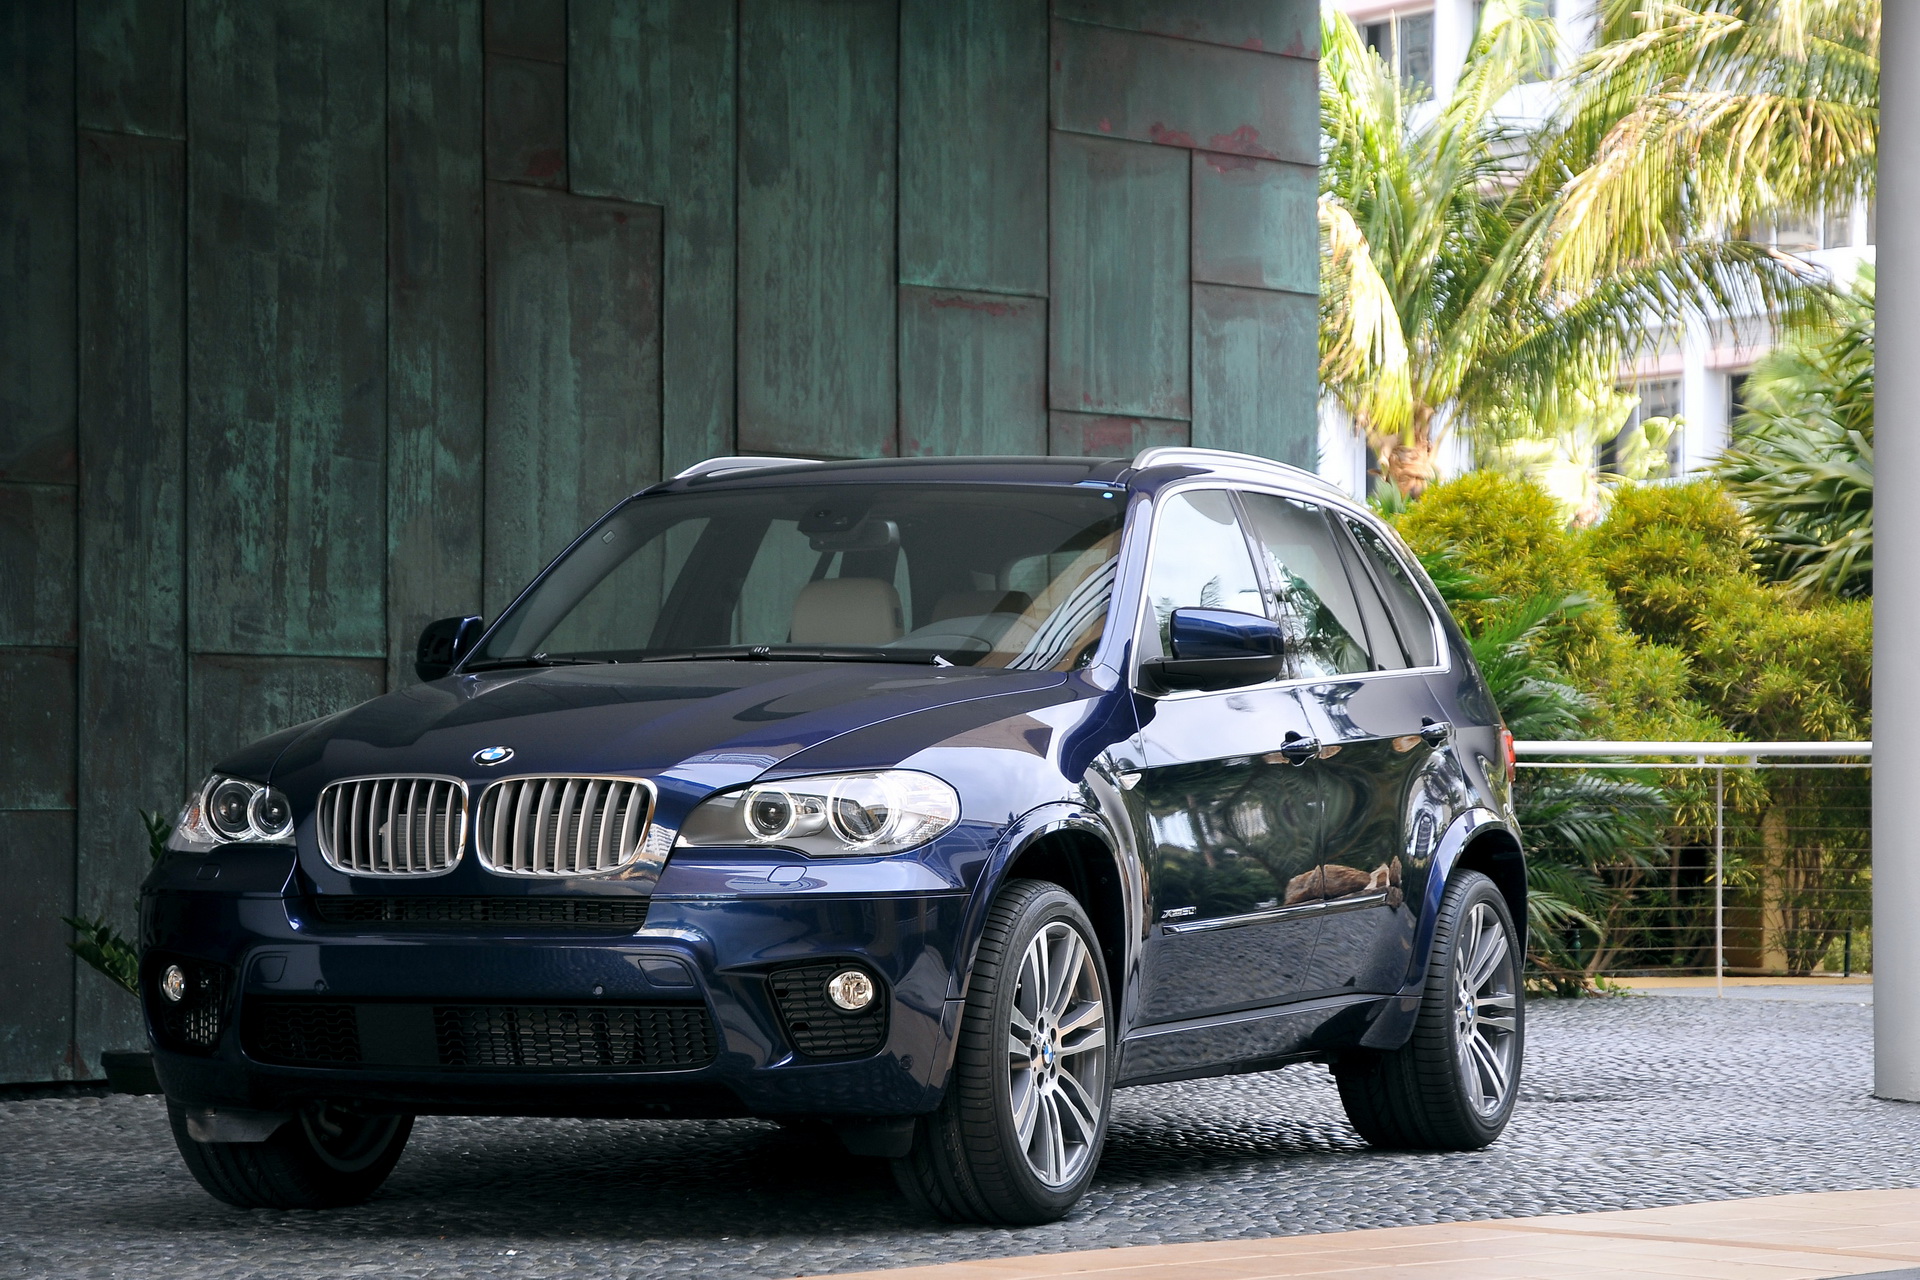 М5 70. БМВ x5 е70. БМВ х5 70. BMW x5 e70, BMW. BMW x5 e70 Restyle.